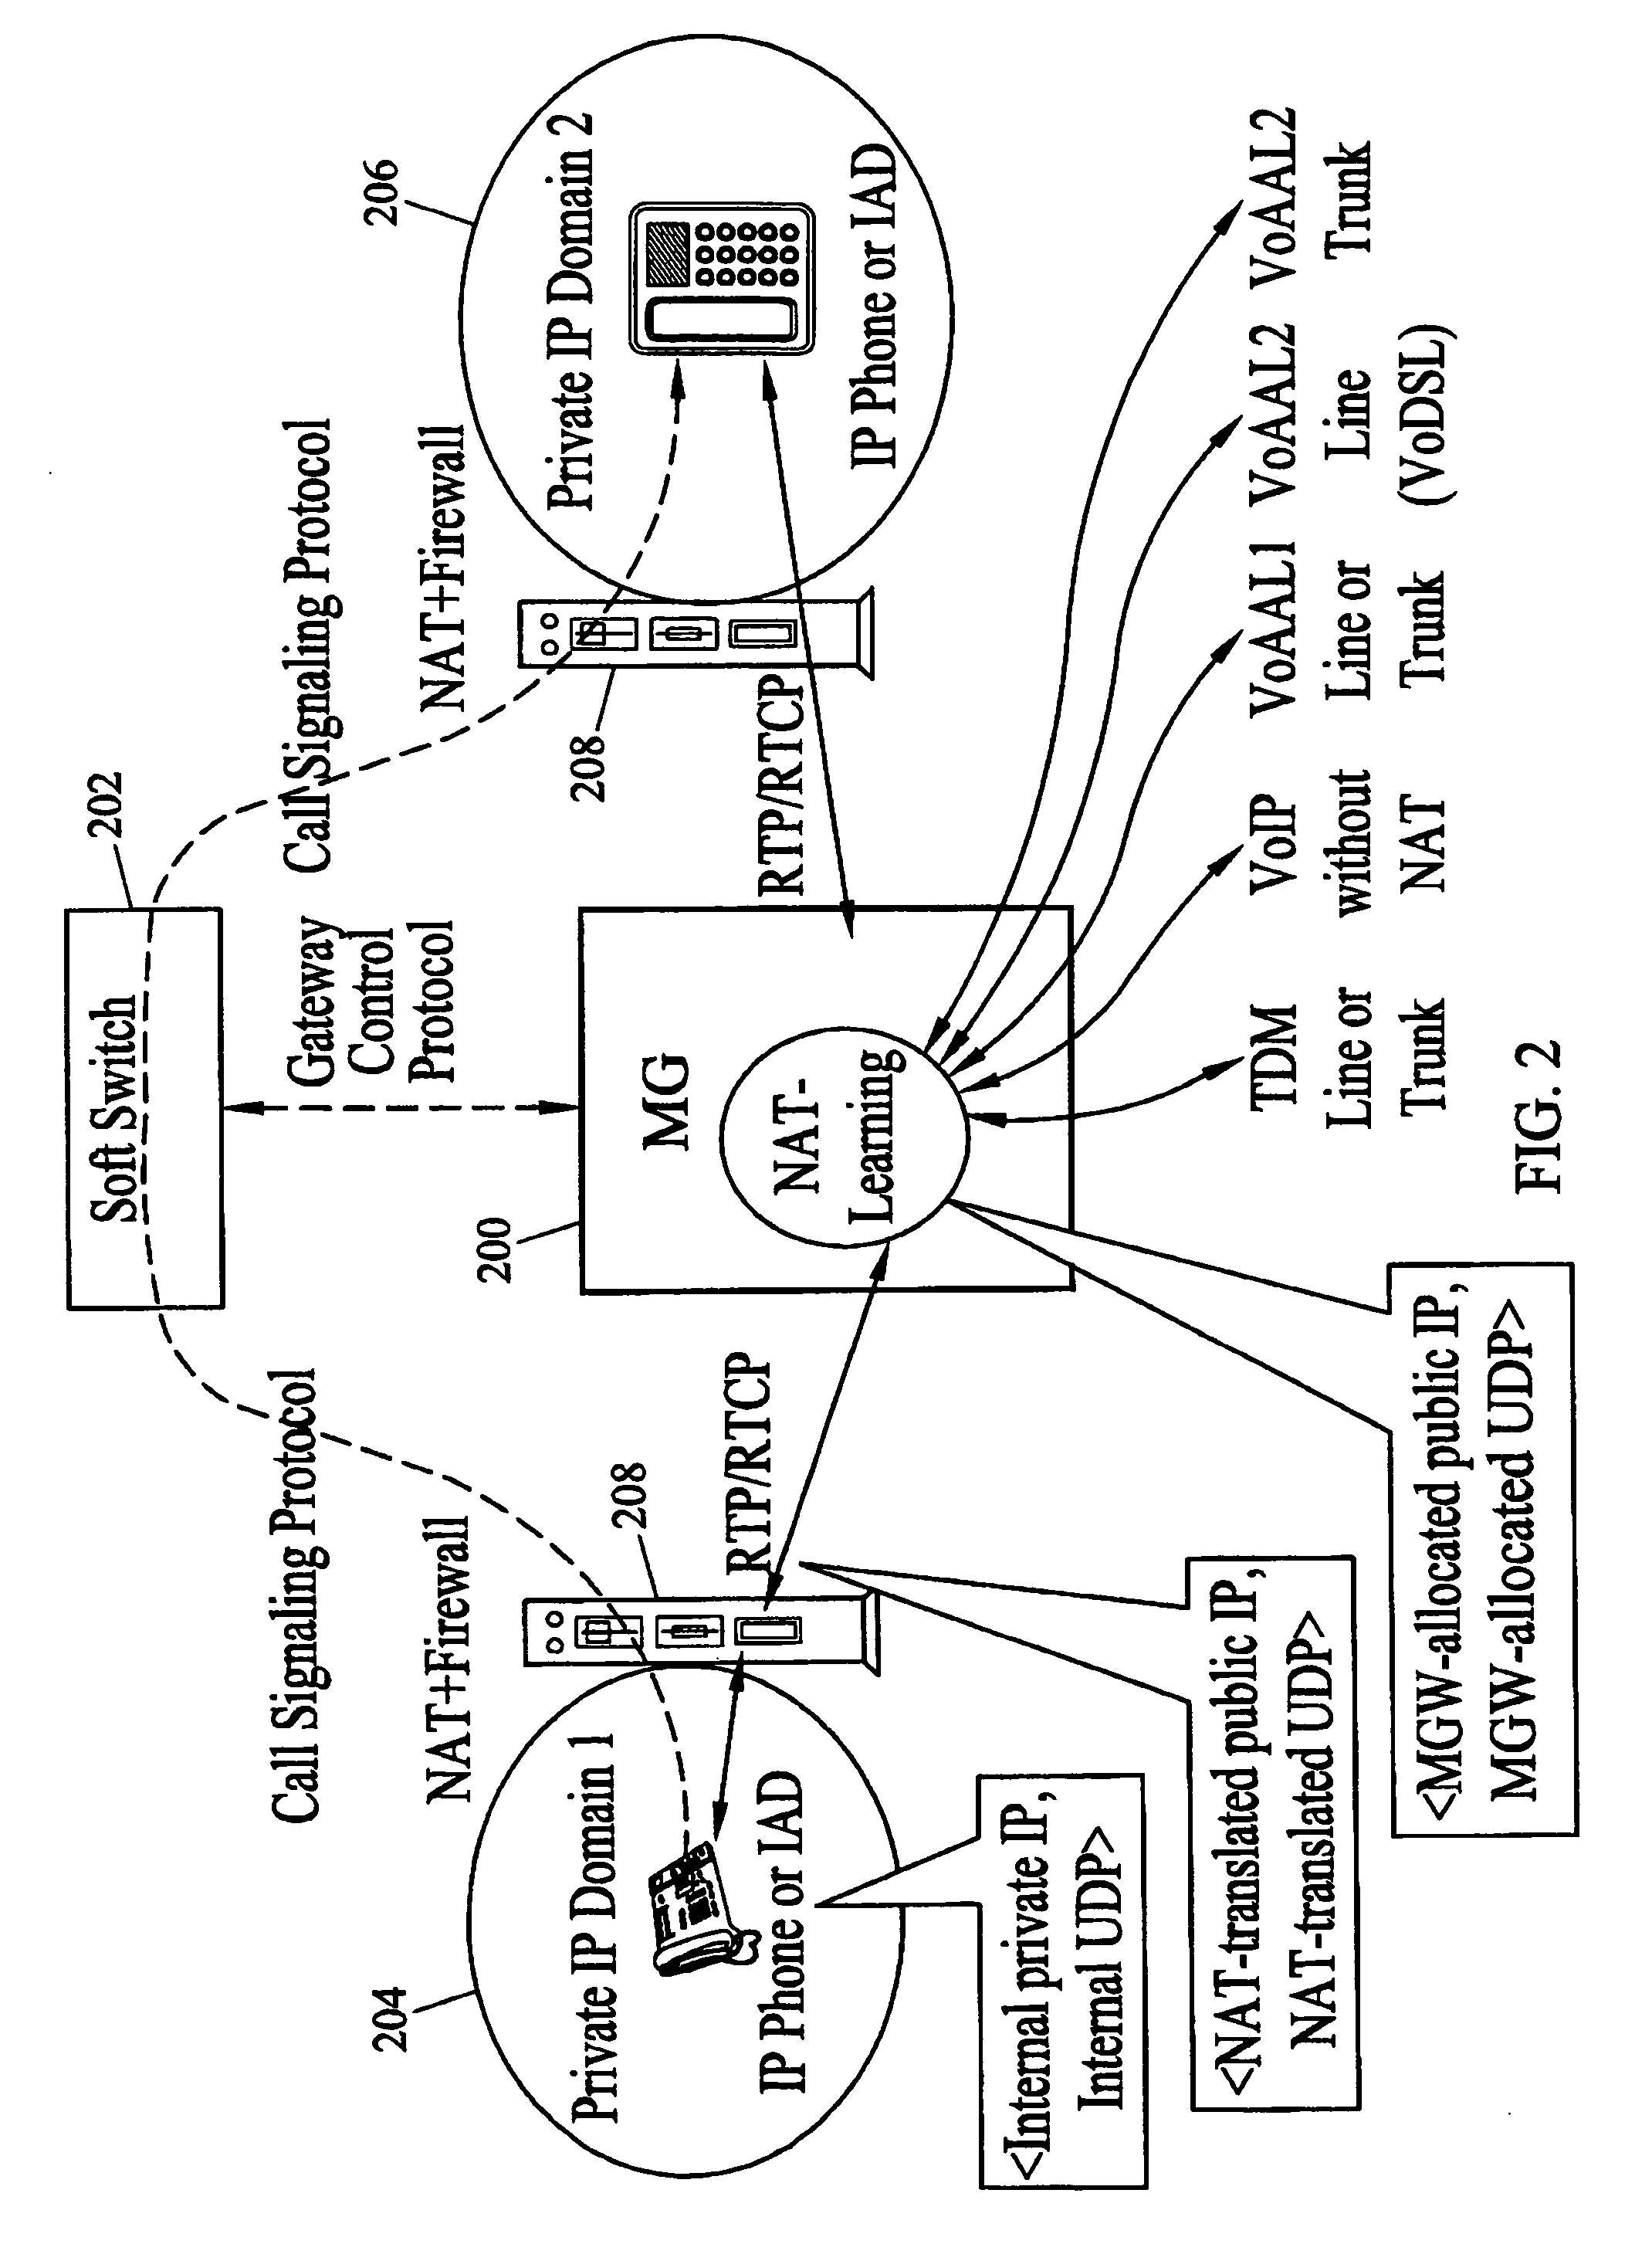 Methods and systems for per-session network address translation (NAT) learning and firewall filtering in media gateway